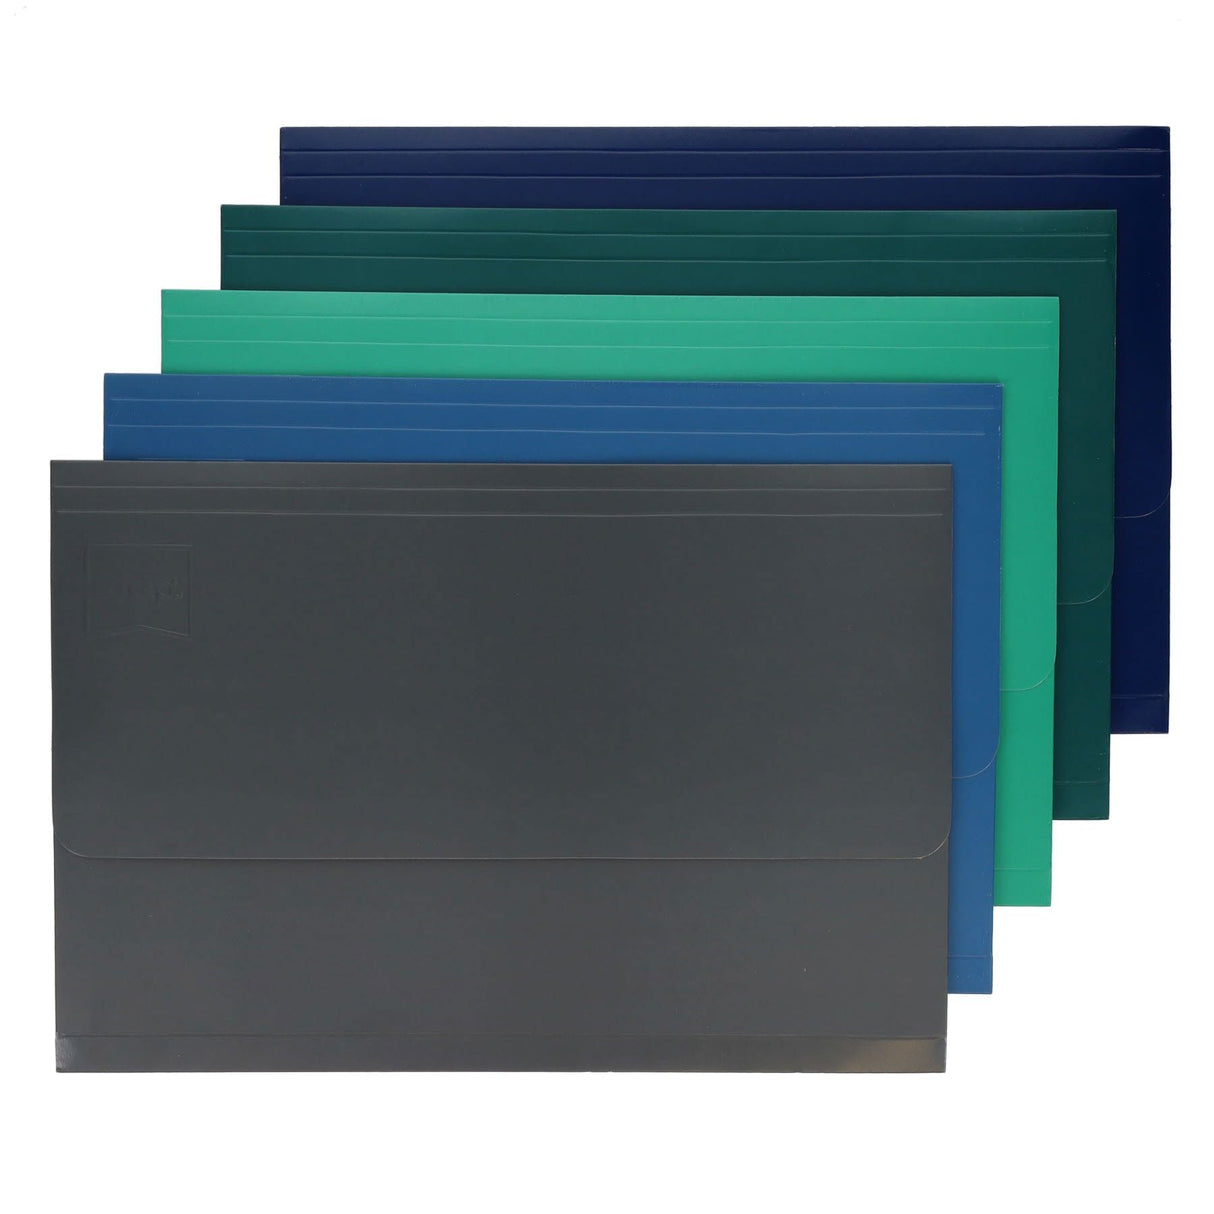 Premier Office Multipack | High Quality Card Document Wallets - Pack of 5 | Stationery Shop UK